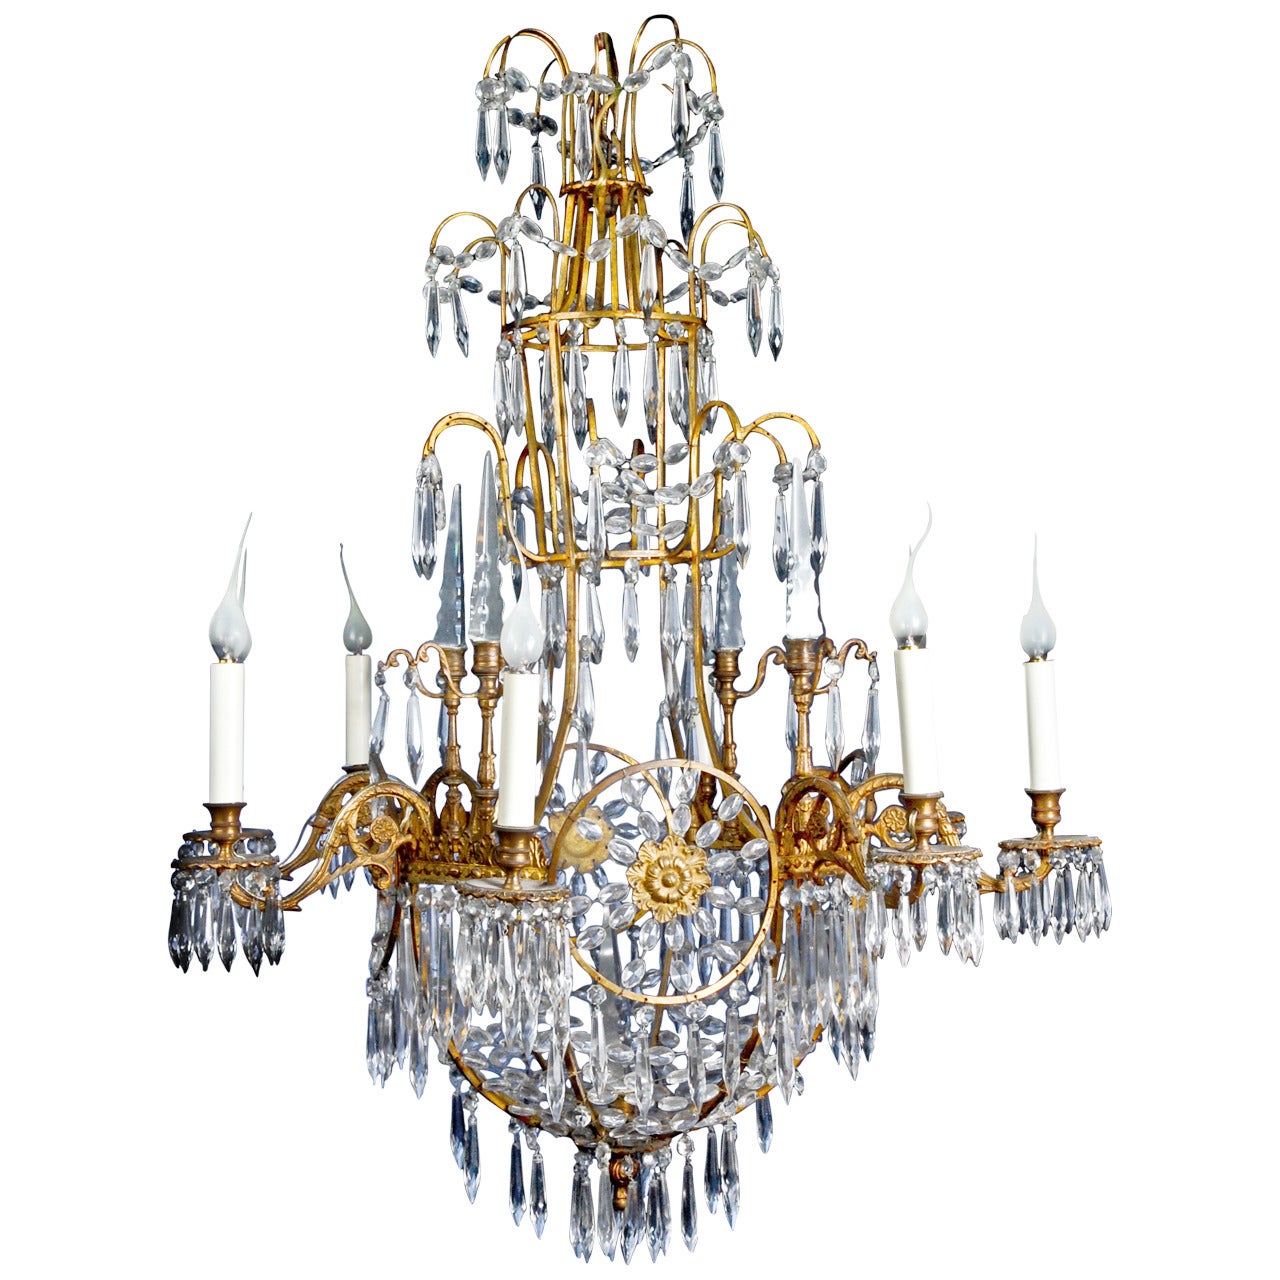 Antique Russian Neoclassical Gilt Bronze and Cut Crystal Chandelier